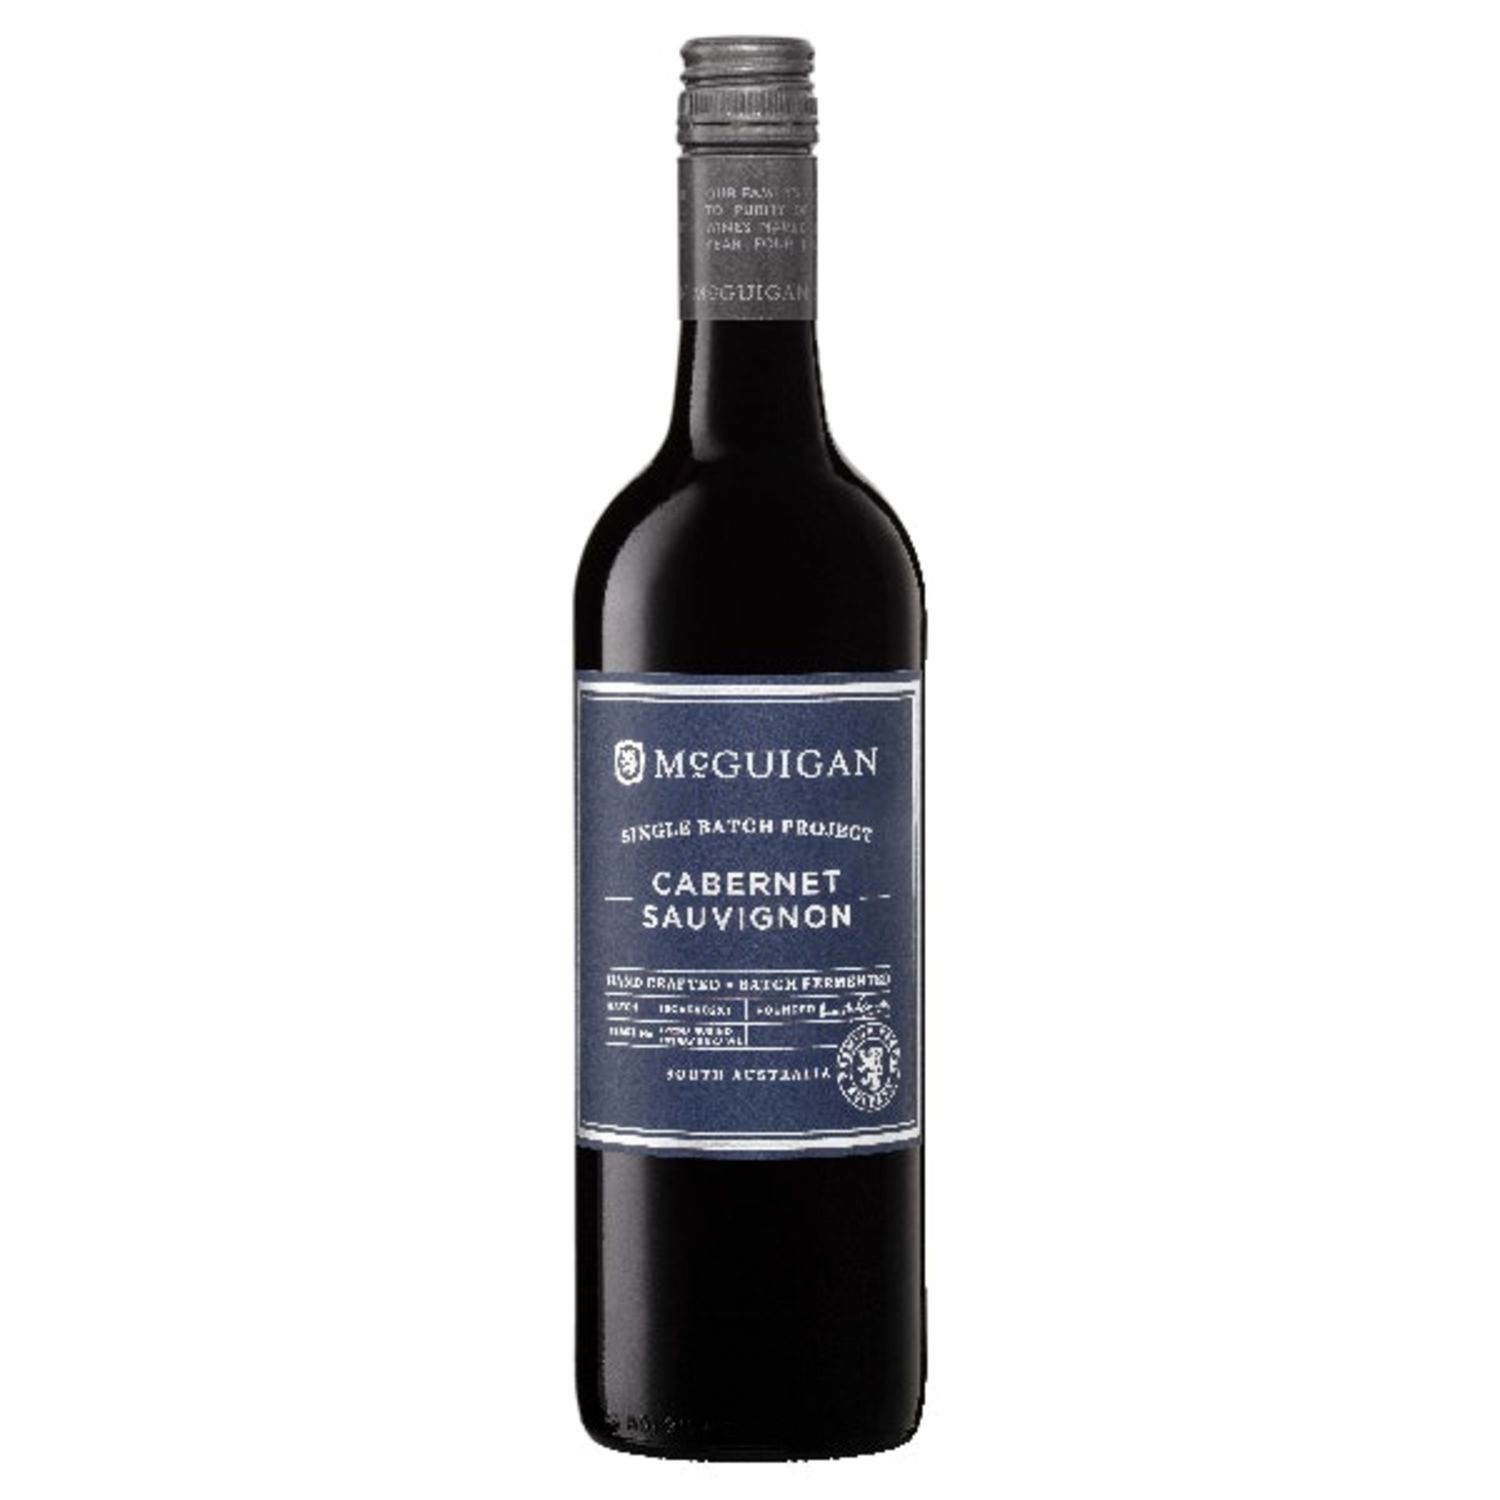 Lashings of blackcurrant and berry fruit flavours combine with subtle oak integration and pleasant herbaceous notes. Fine velvety tannins ensure a balanced and long-lasting finish.<br /> <br />Alcohol Volume: 13.00%<br /><br />Pack Format: Bottle<br /><br />Standard Drinks: 7.7</br /><br />Pack Type: Bottle<br /><br />Country of Origin: Australia<br /><br />Region: South Australia<br /><br />Vintage: Vintages Vary<br />